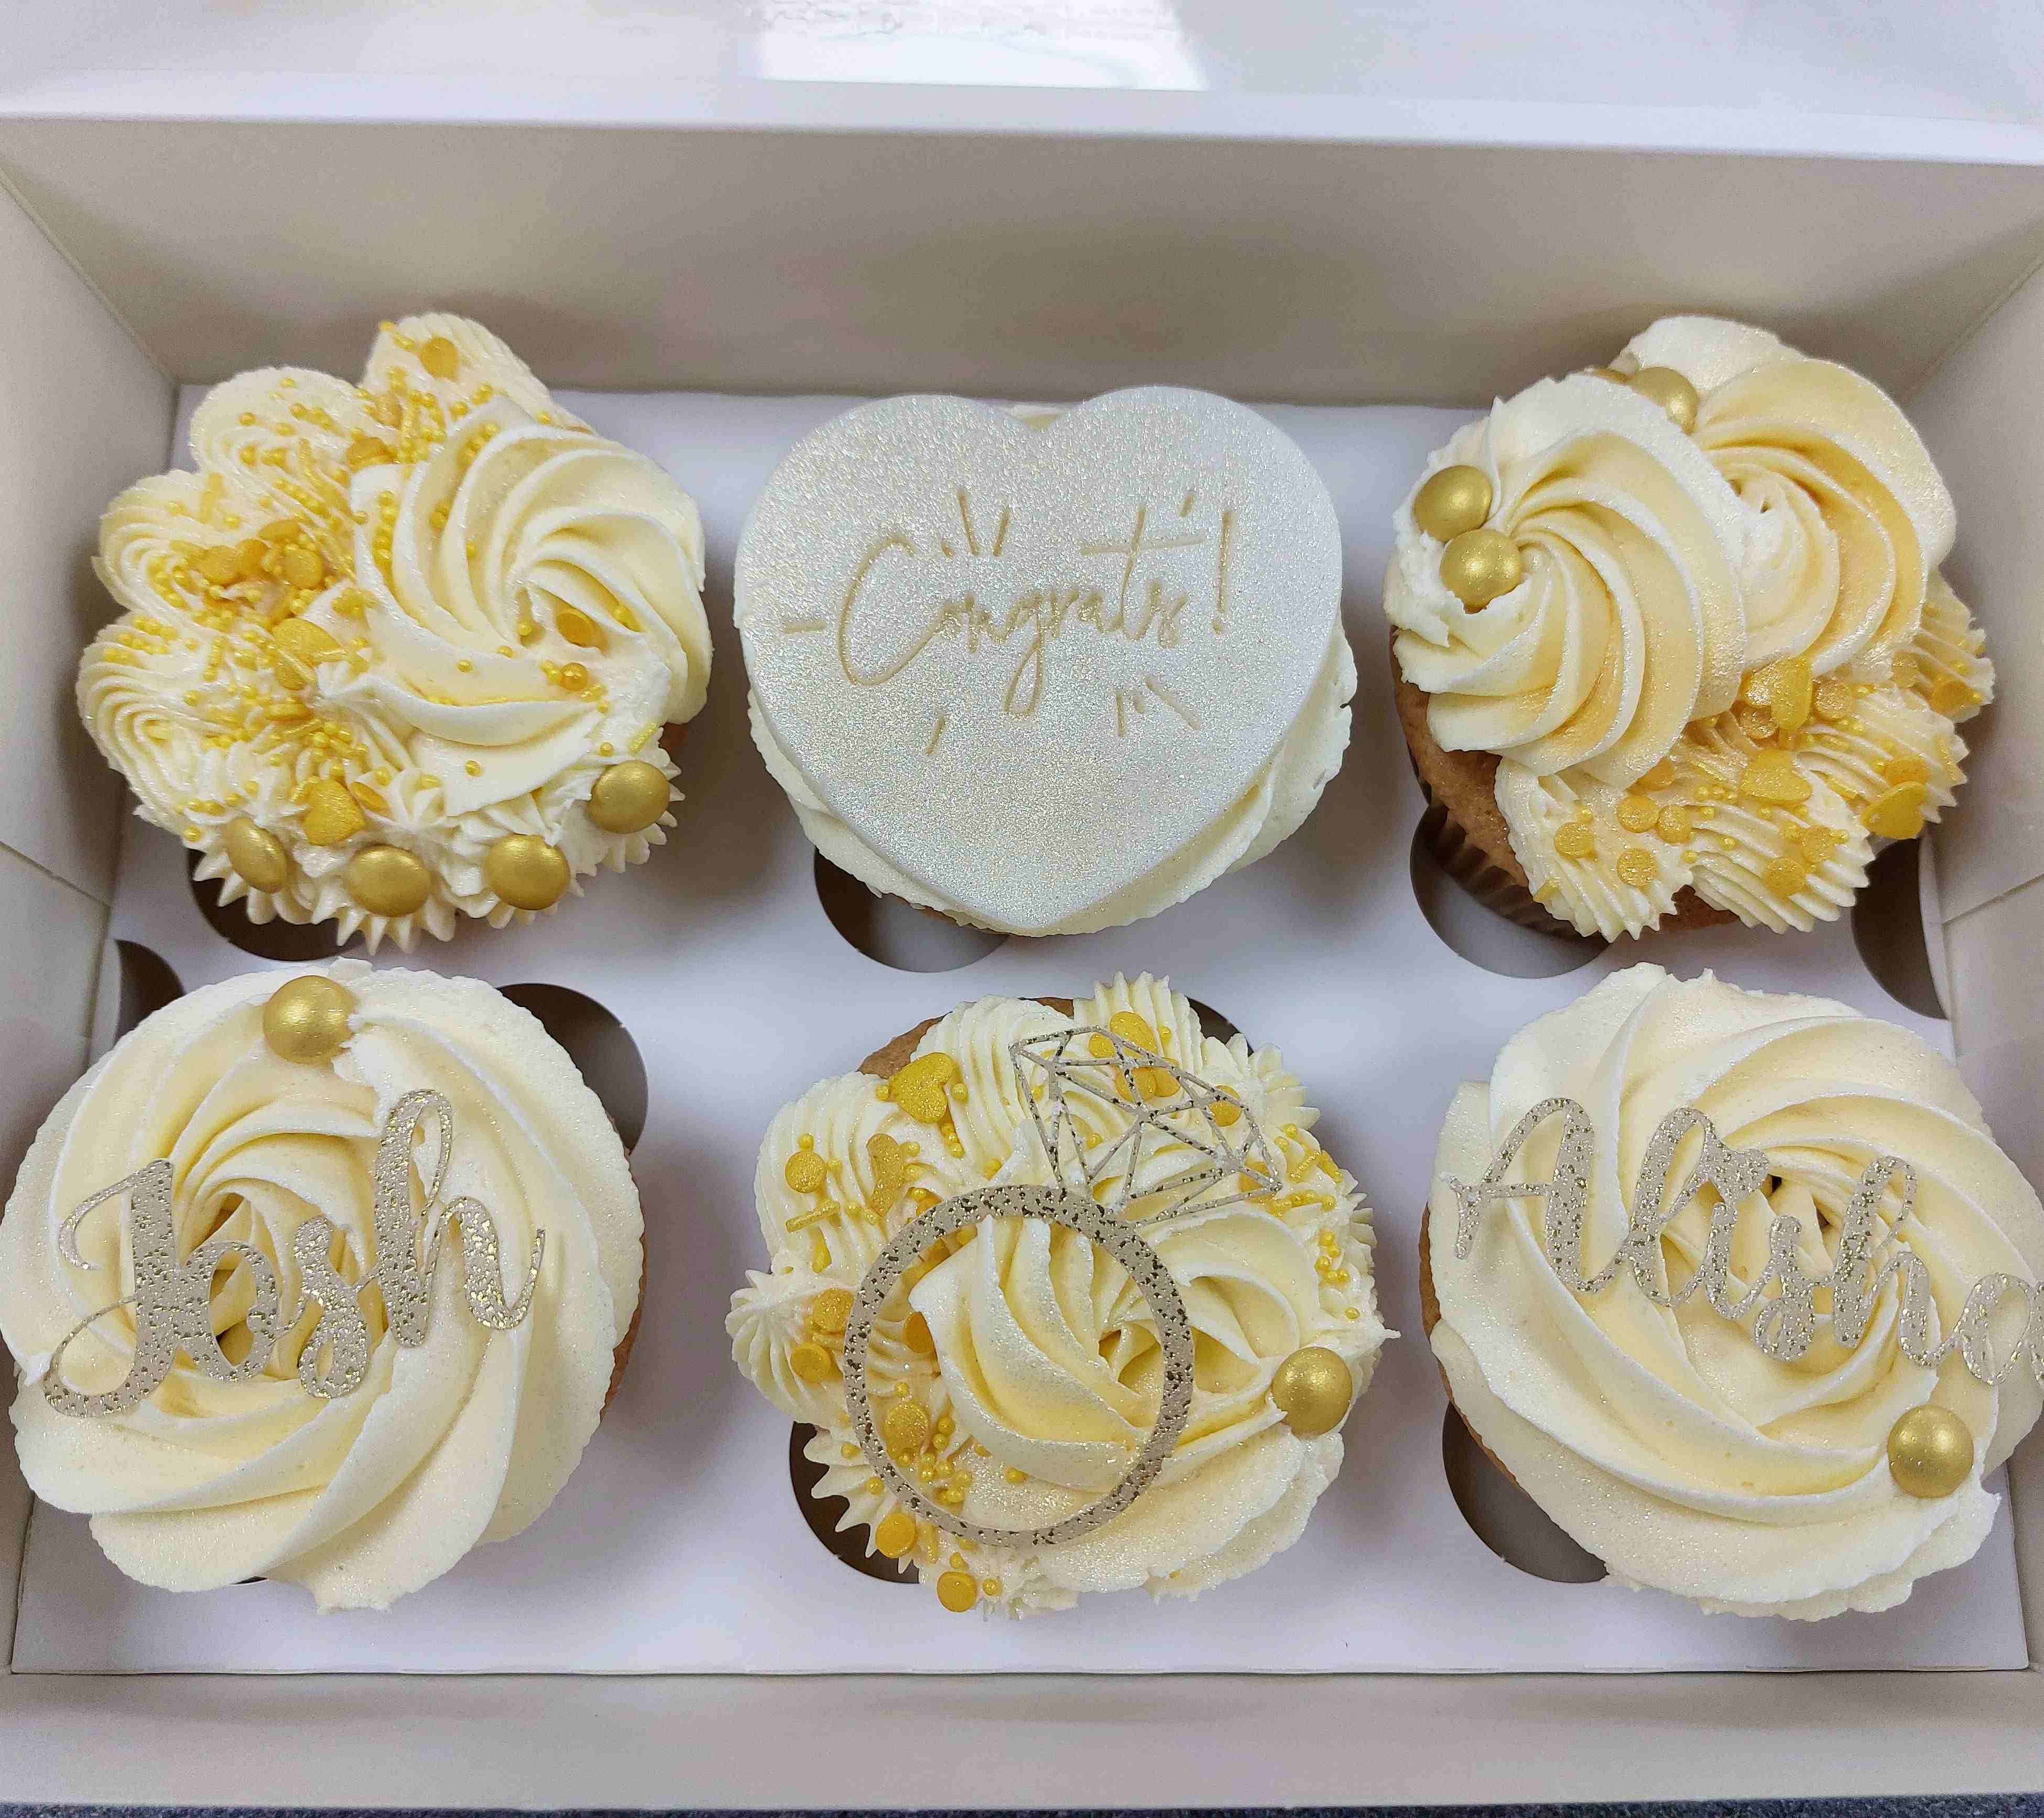 Annies Bakes & Cakes | Gallery